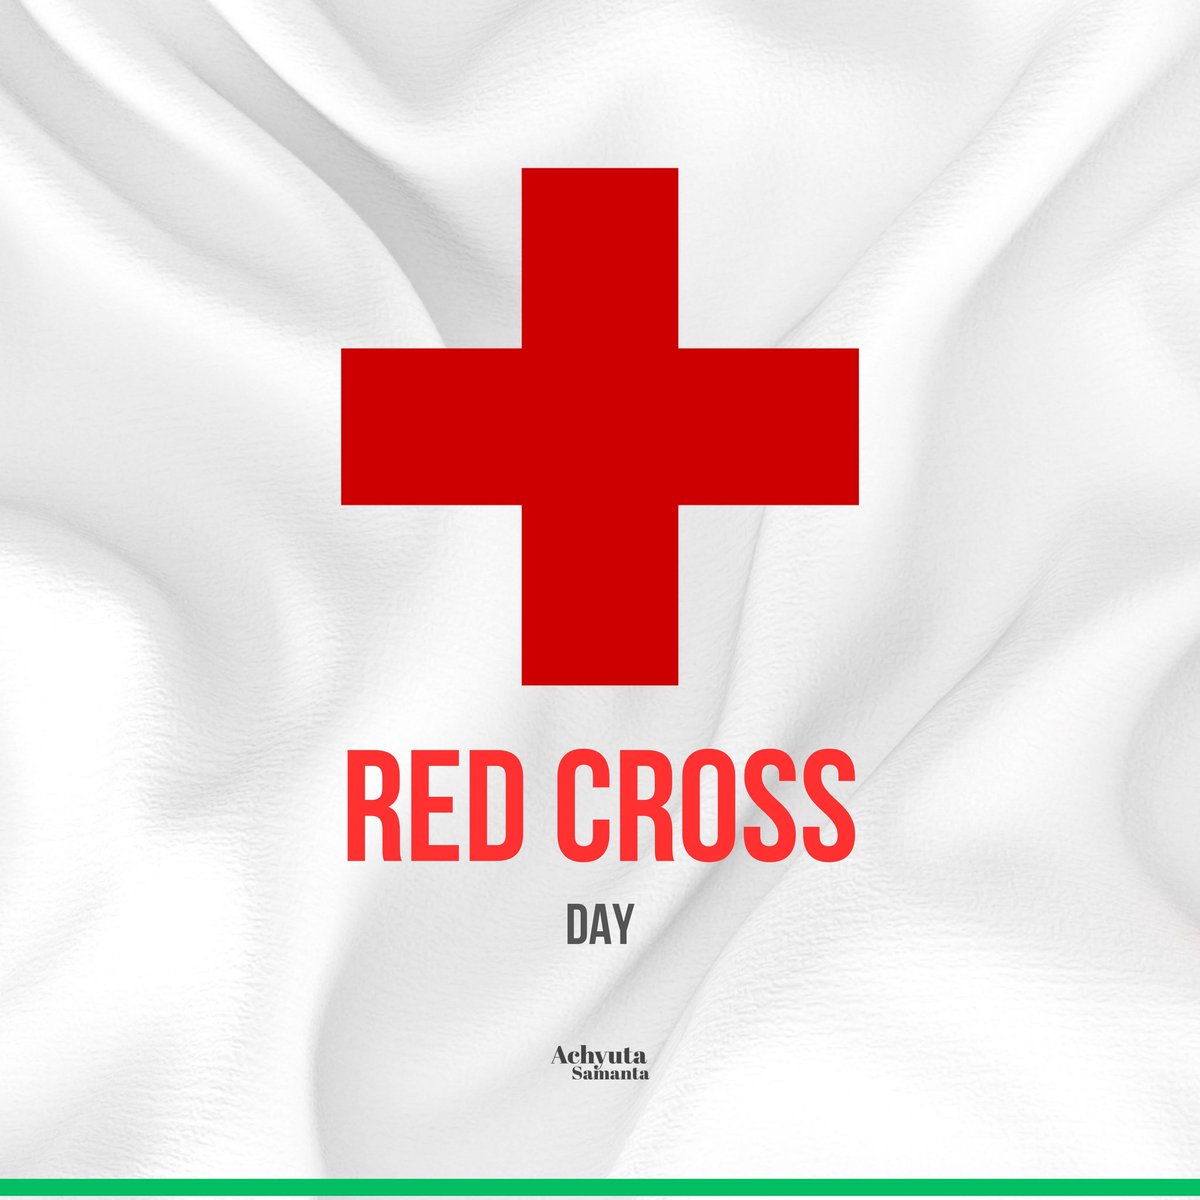 On this World Red Cross Day, let us honour the remarkable spirit of humanitarian service that uplifts communities worldwide. Together, let's extend a helping hand and spread kindness, embodying the ethos of compassion and solidarity.